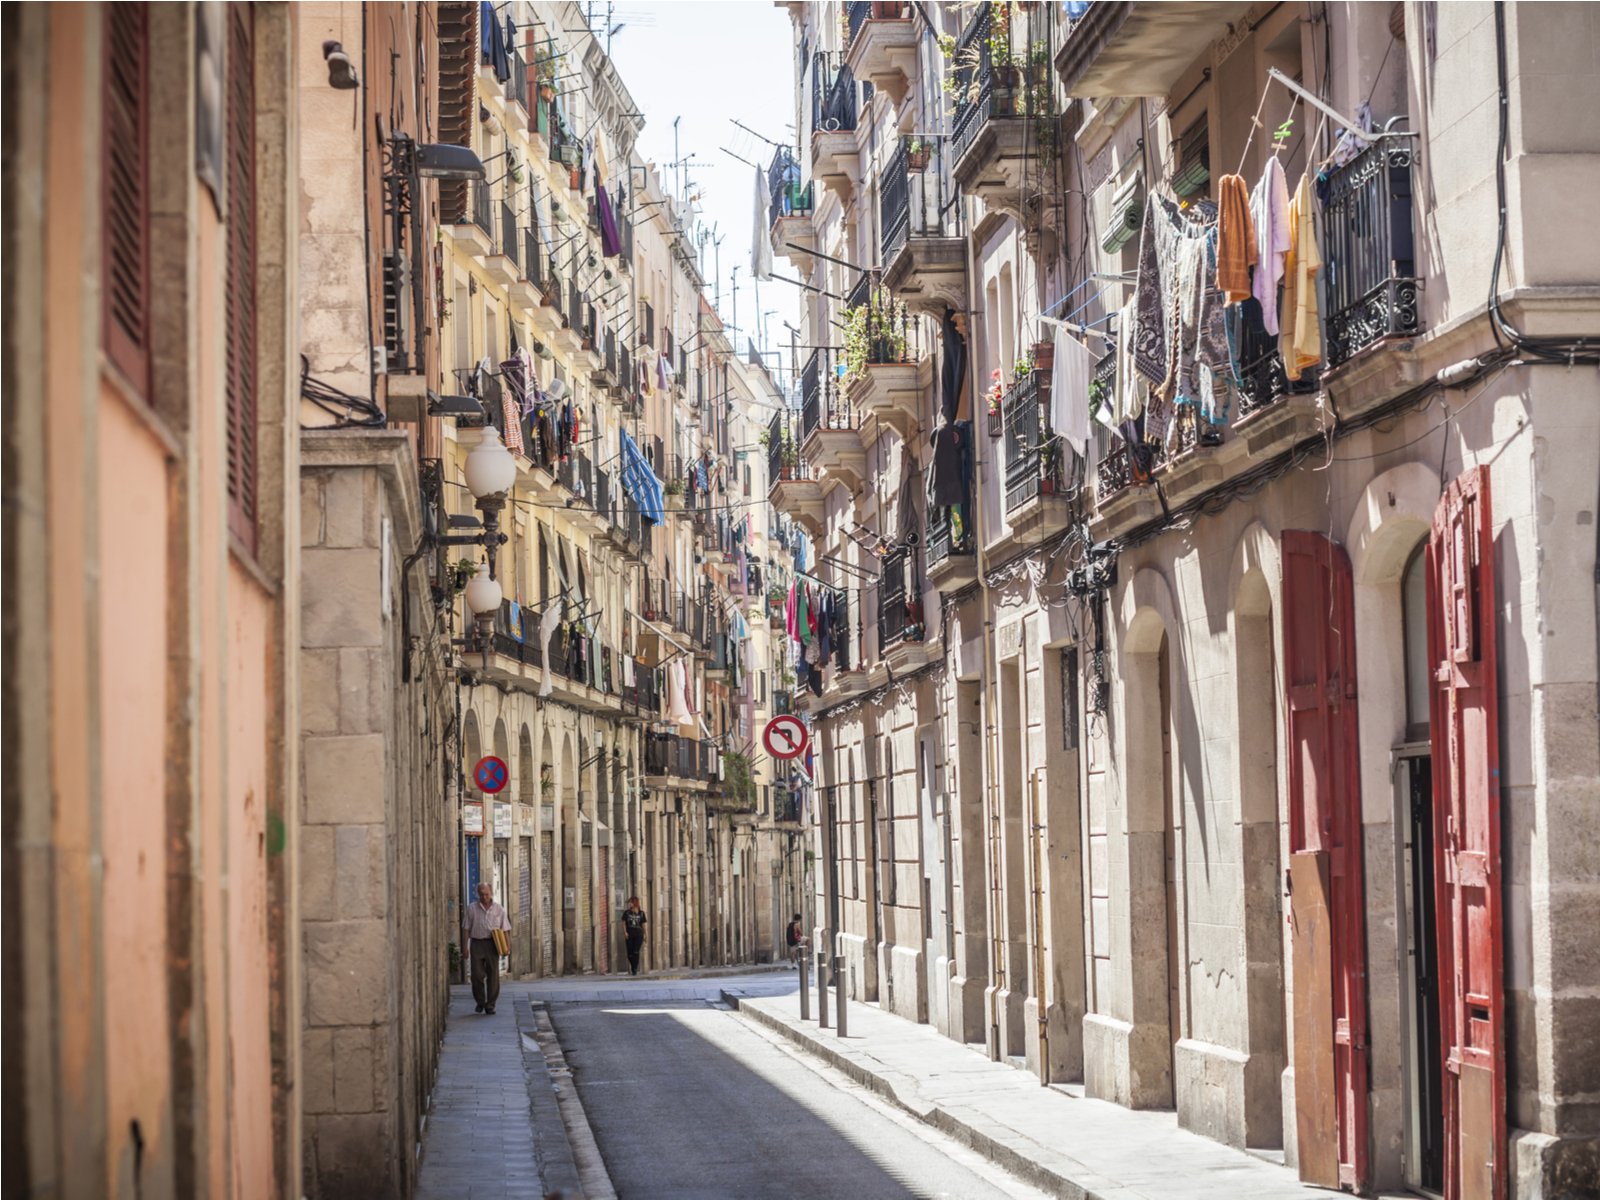 El Raval quarter in Barcelona, one of our top picks when considering where to stay in Barcelona